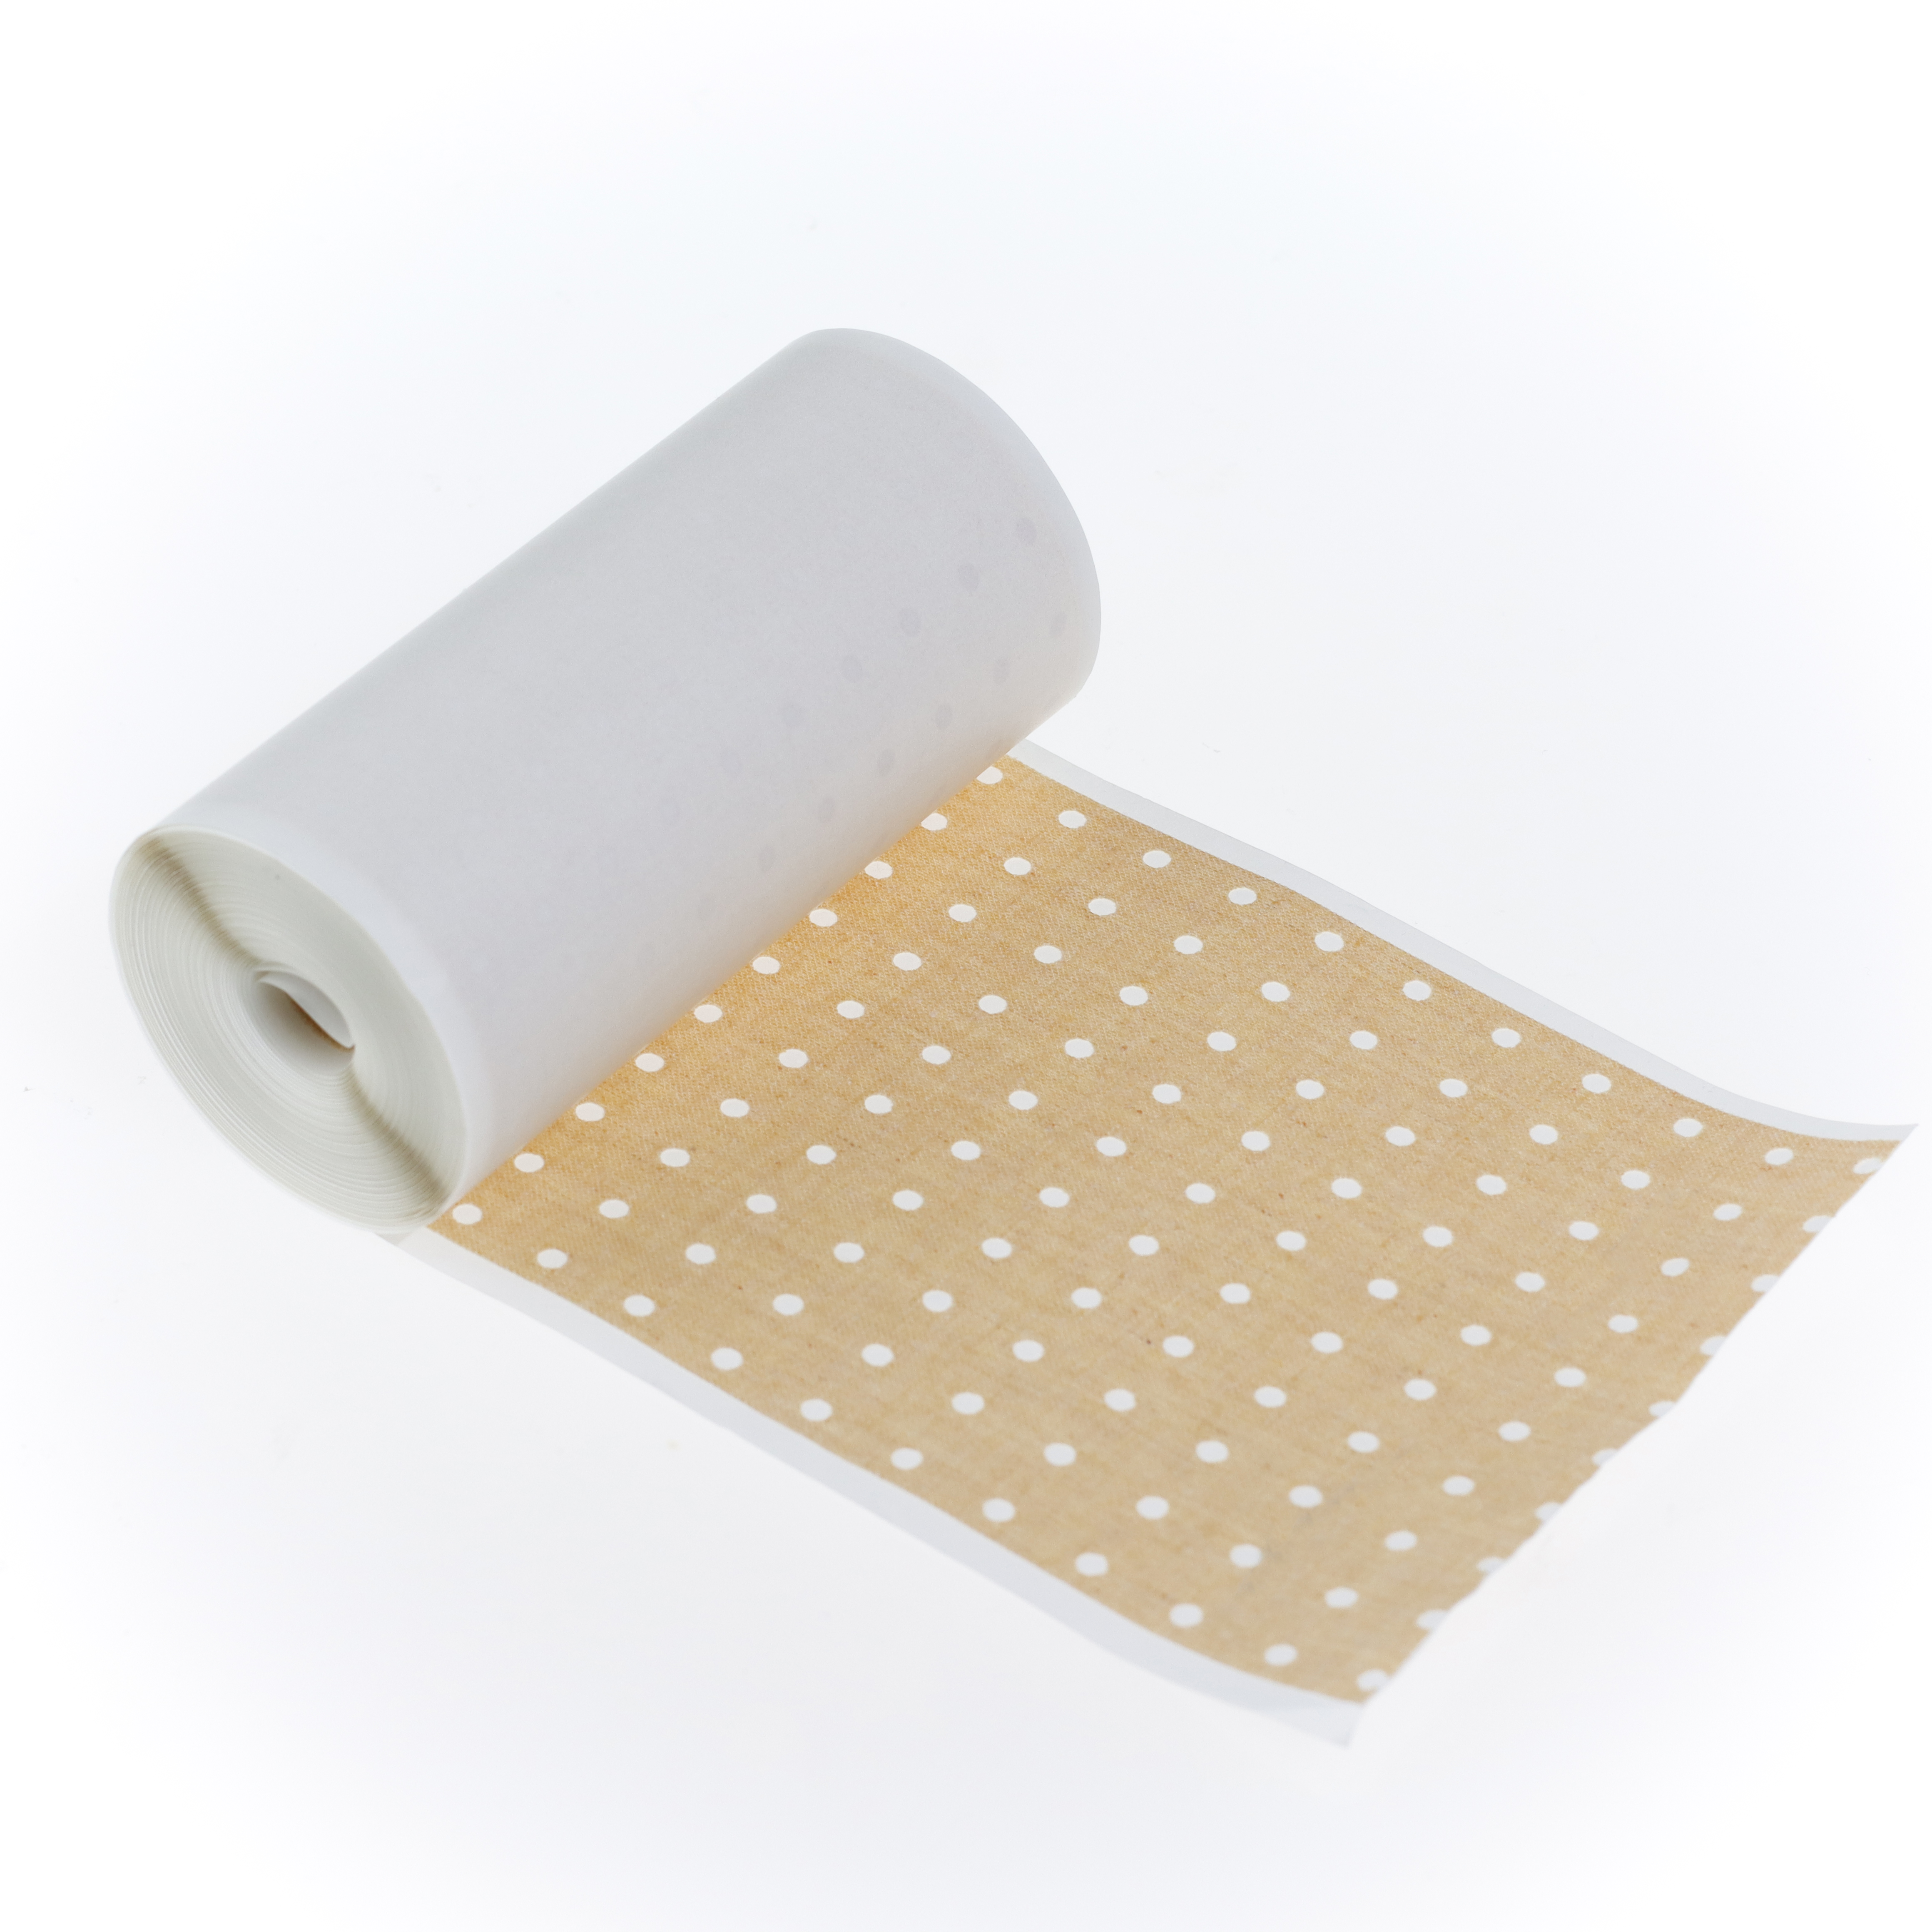 Perforated Zinc Oxide Adhesive Tape Featured Image